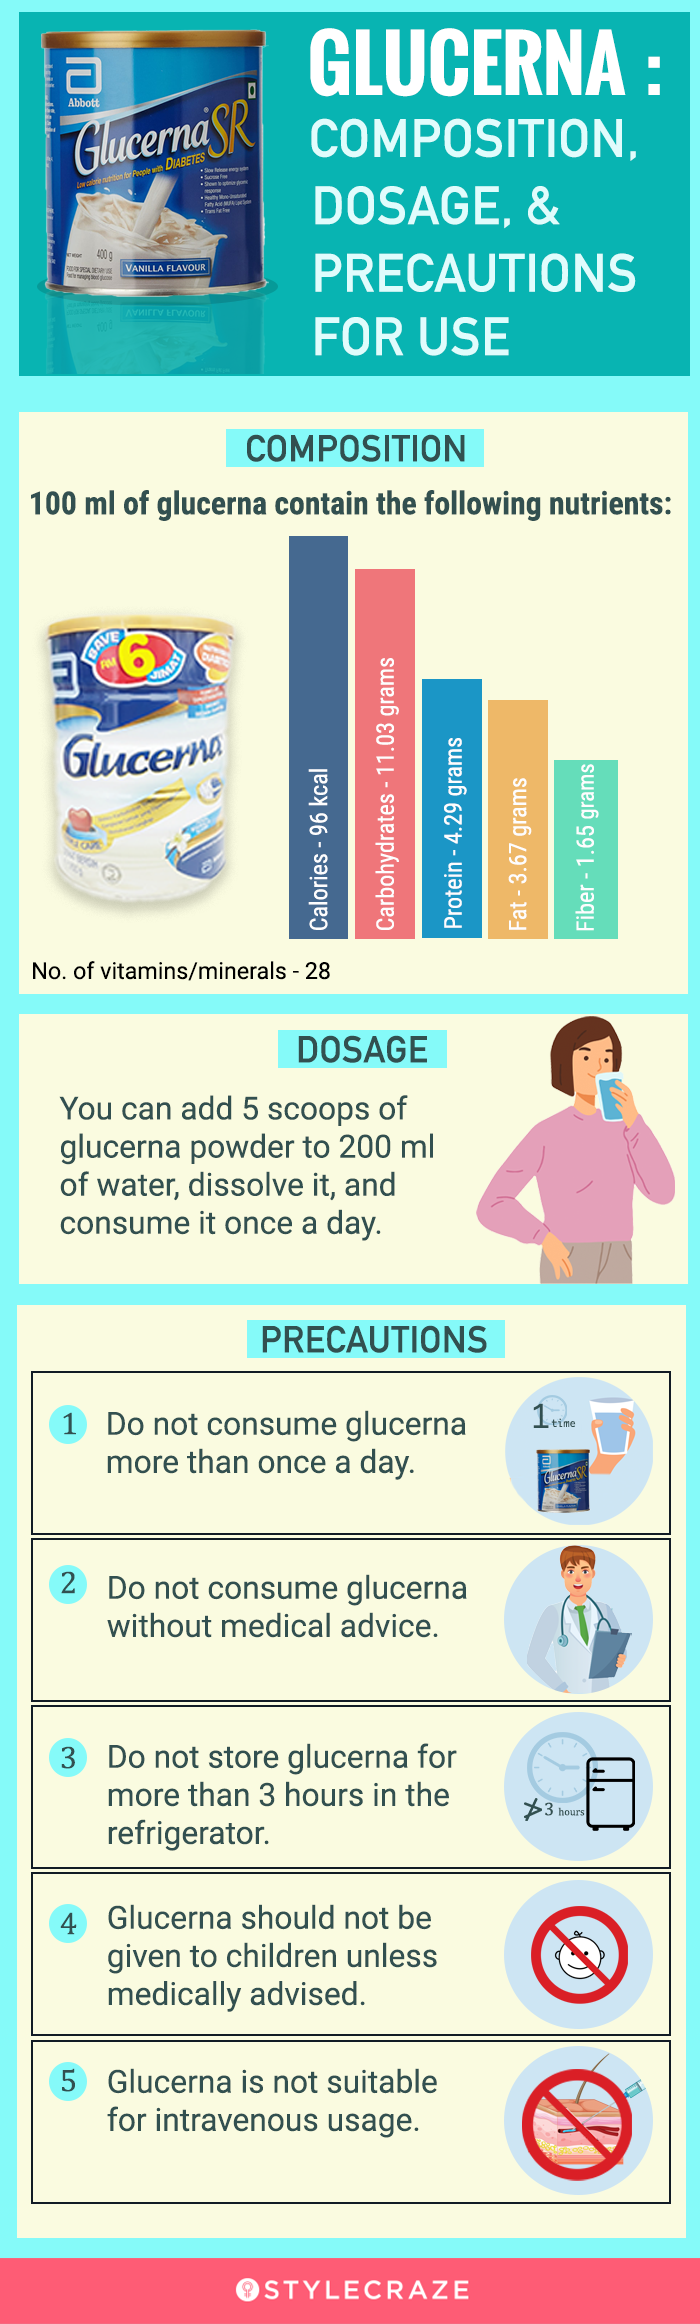 composition, dosage, and precautions for usage of glucerna (infographic)